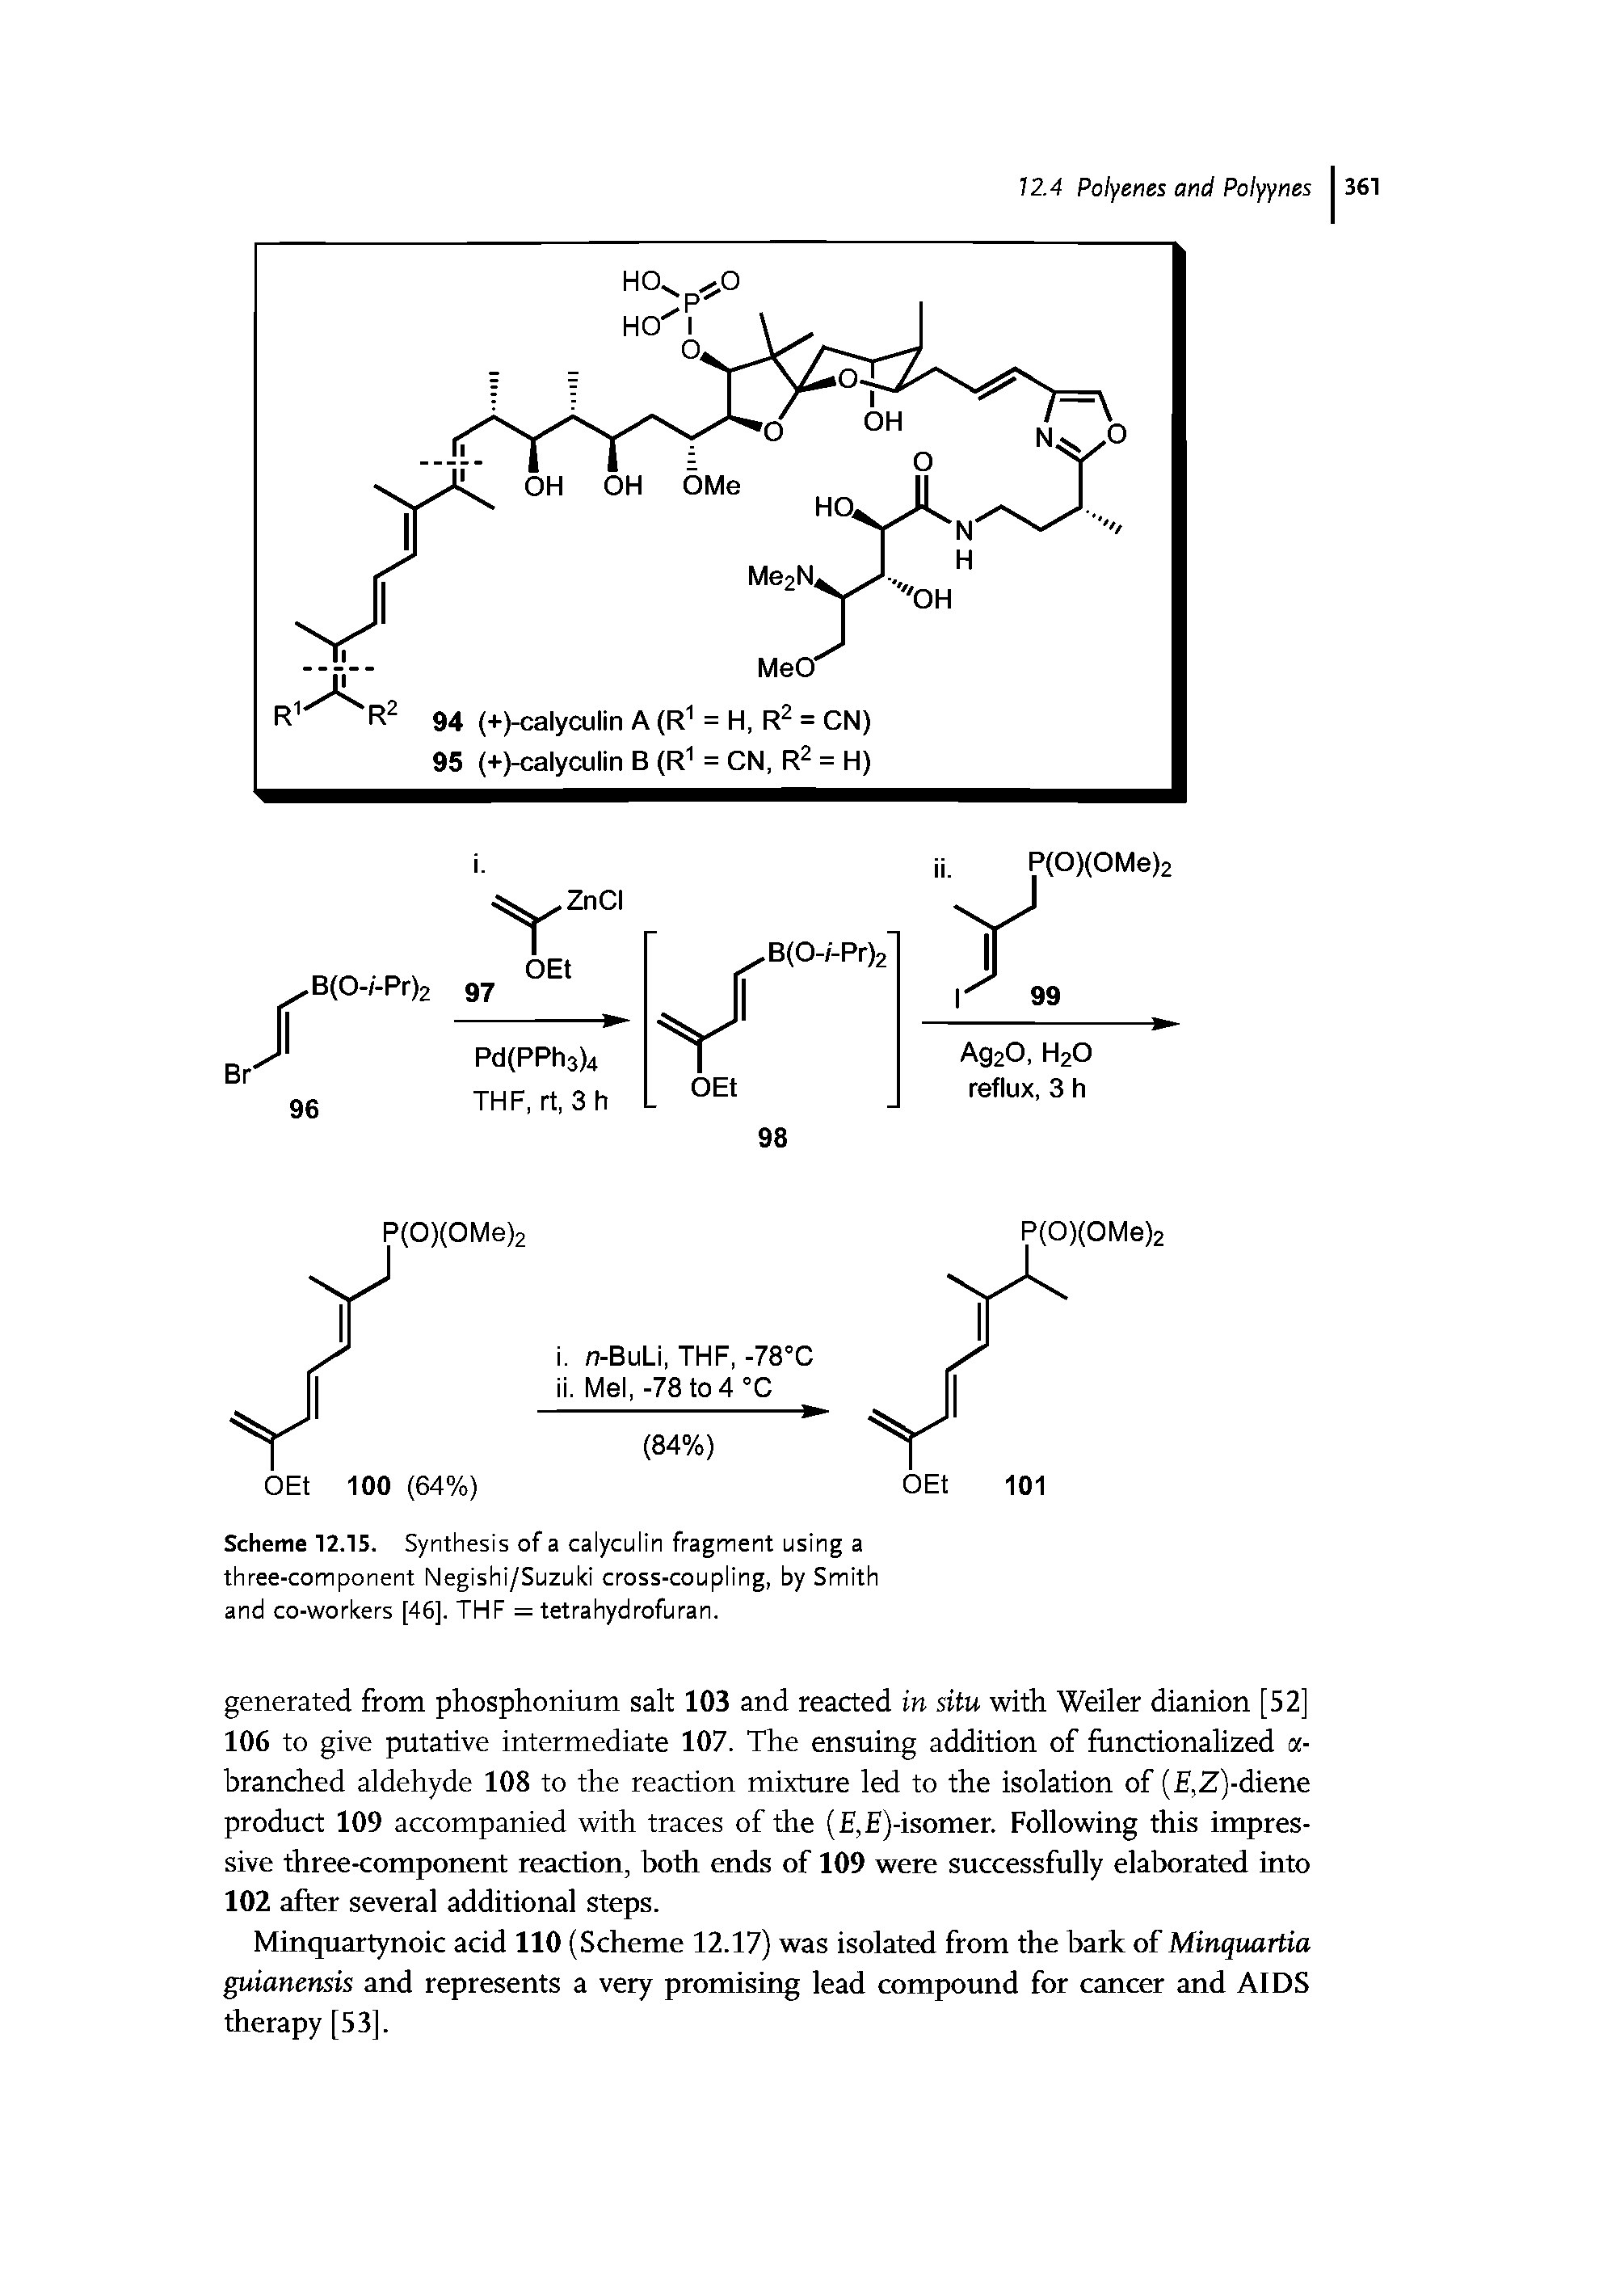 Scheme 12.15. Synthesis of a calyculin fragment using a three-component Negishi/Suzuki cross-coupling, by Smith and co-workers [46]. THF = tetrahydrofuran.